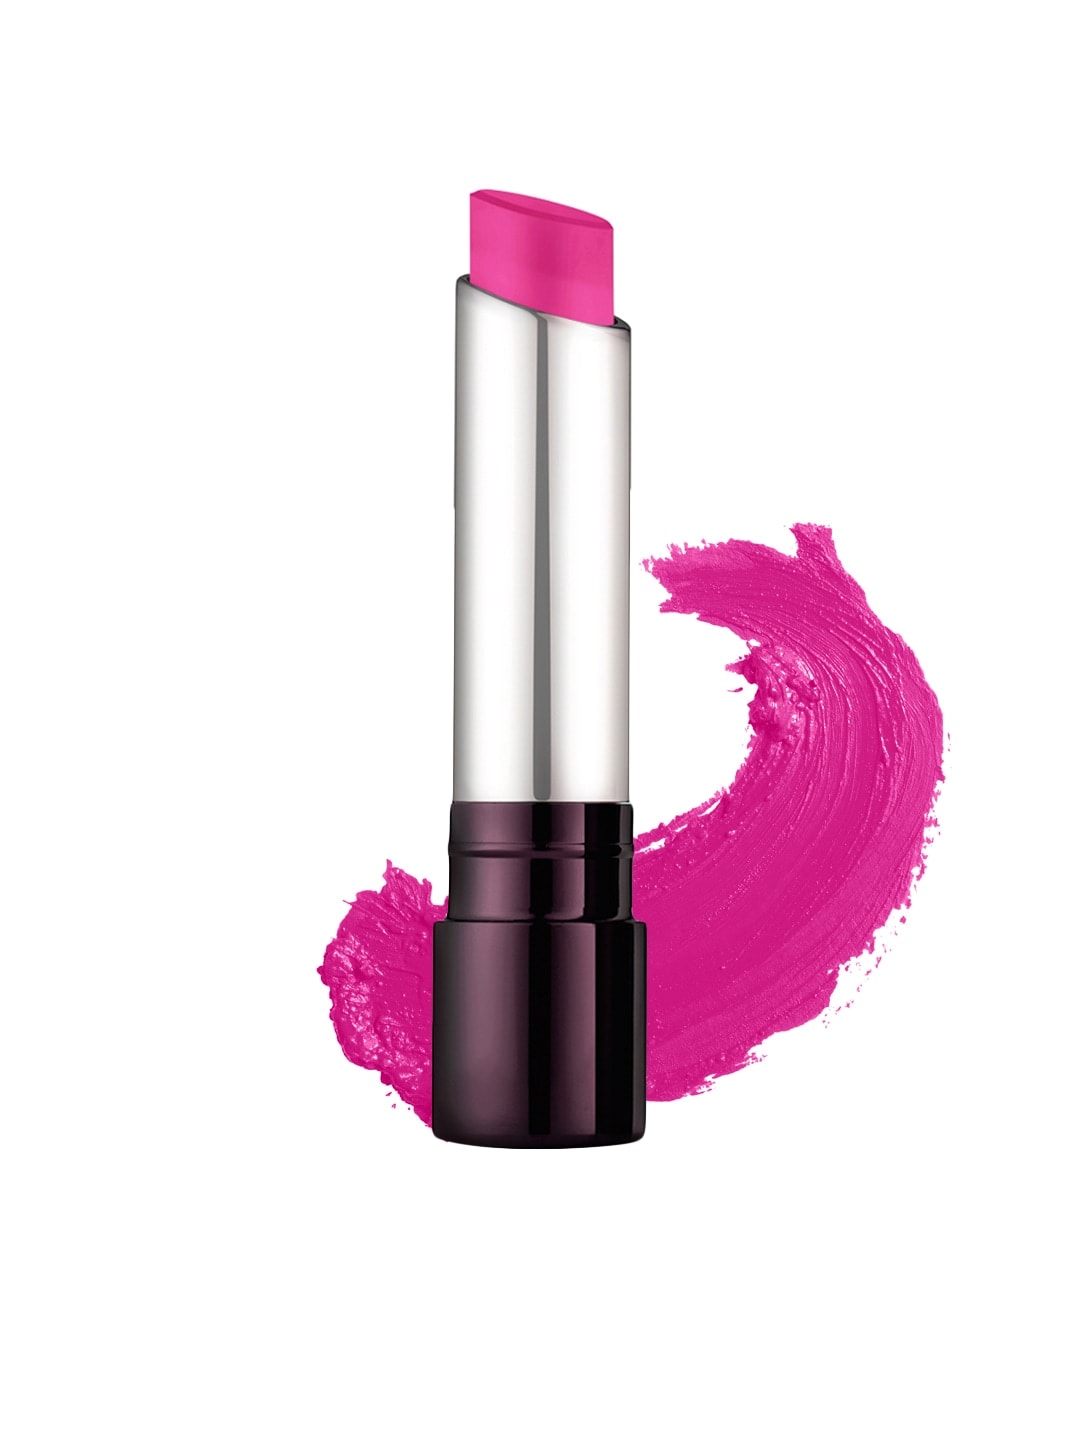 Lotus Herbals Sustainable Make-up Proedit Silk Touch Matte Lip Color - Pink Puzzle SM03 4.2gm Price in India